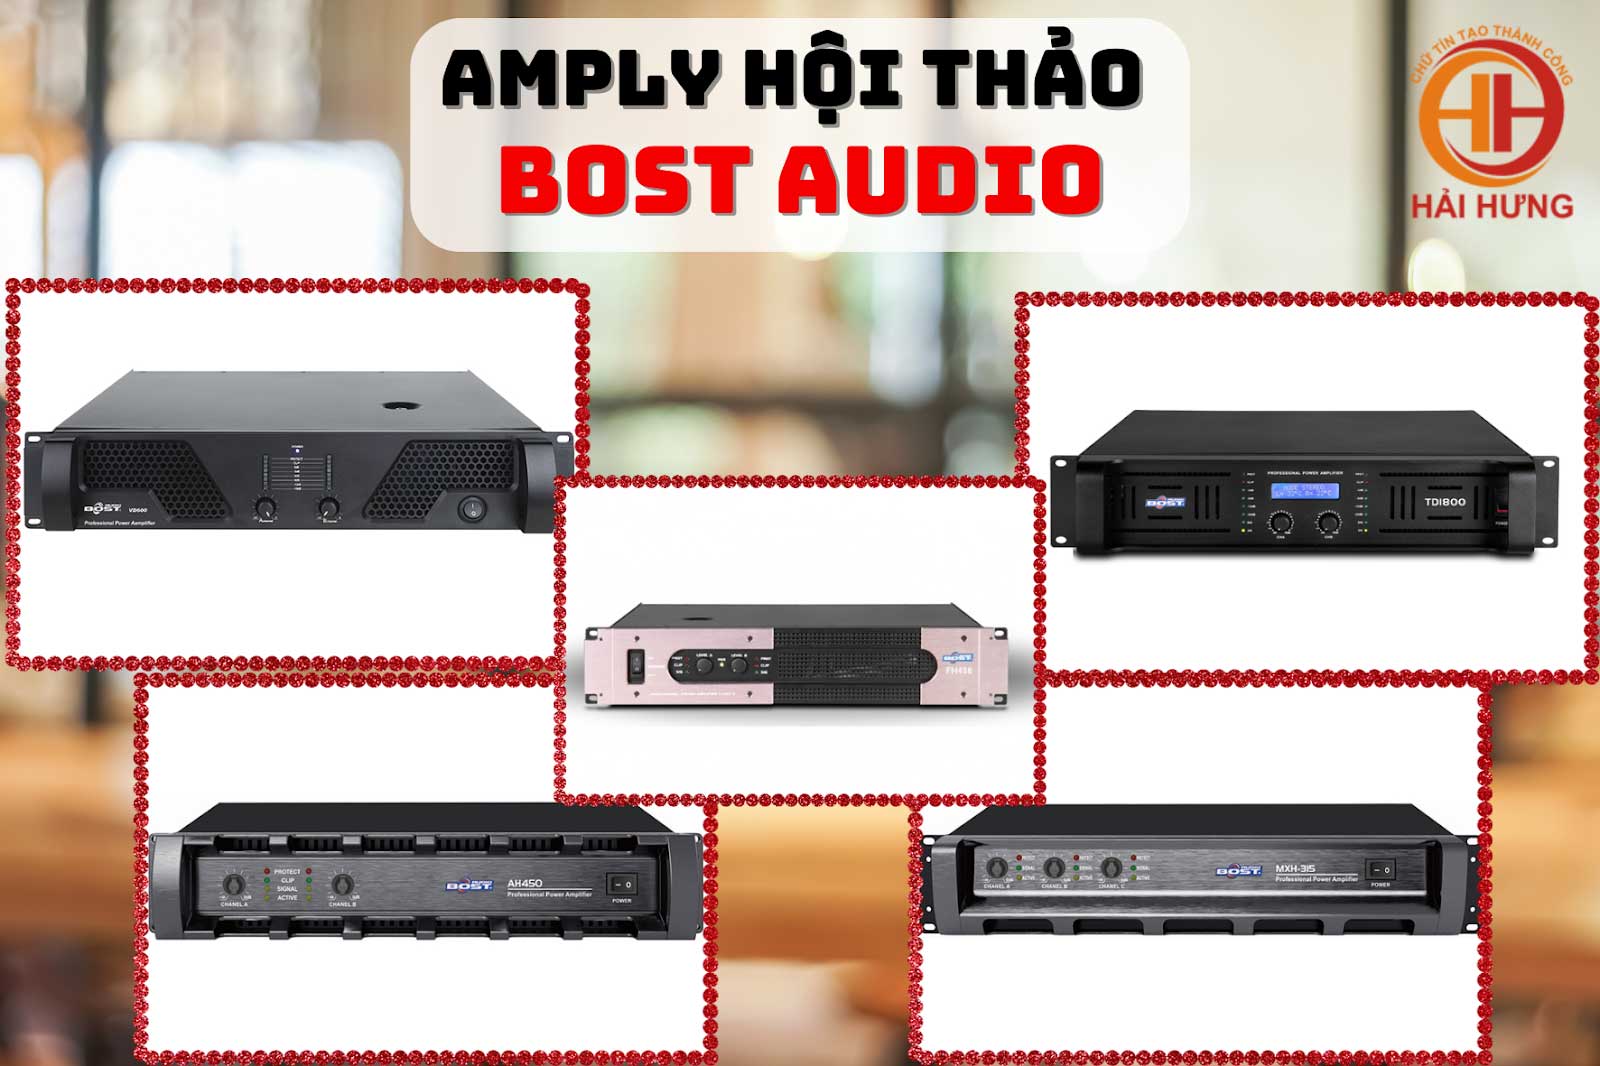 Amply hội thảo Bost Audio